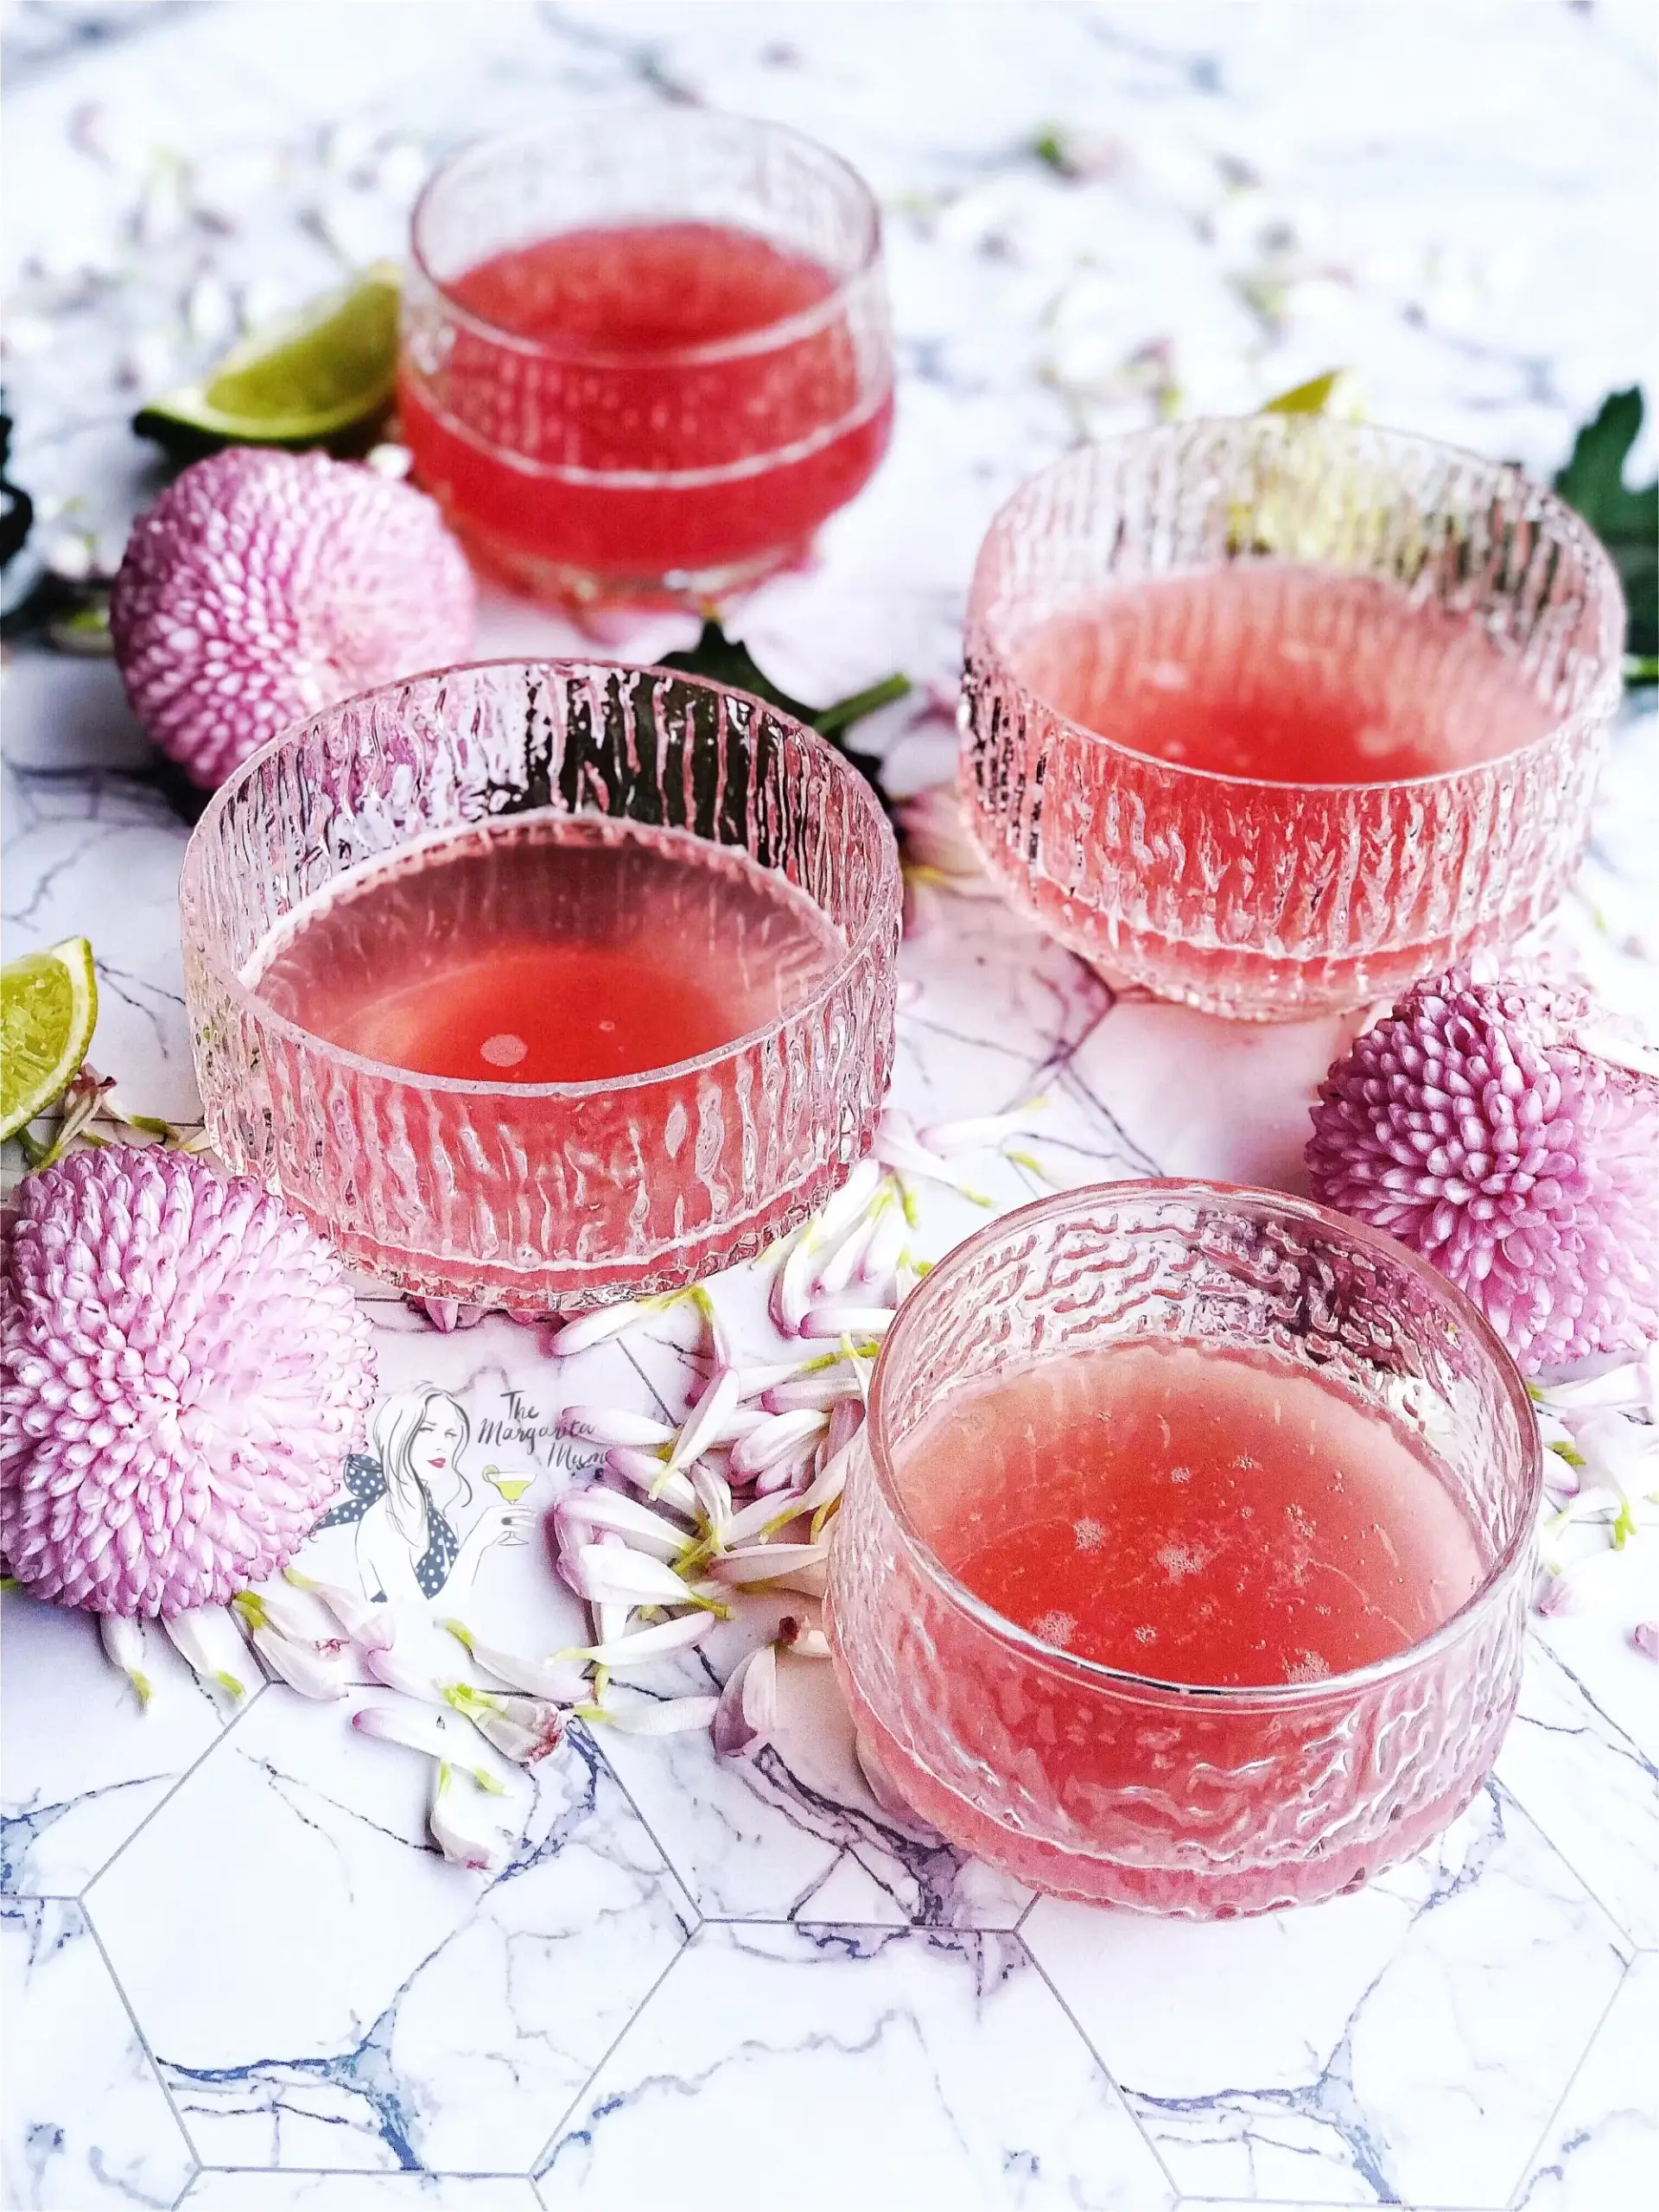 Glasses of a pink-red drink with flowers.